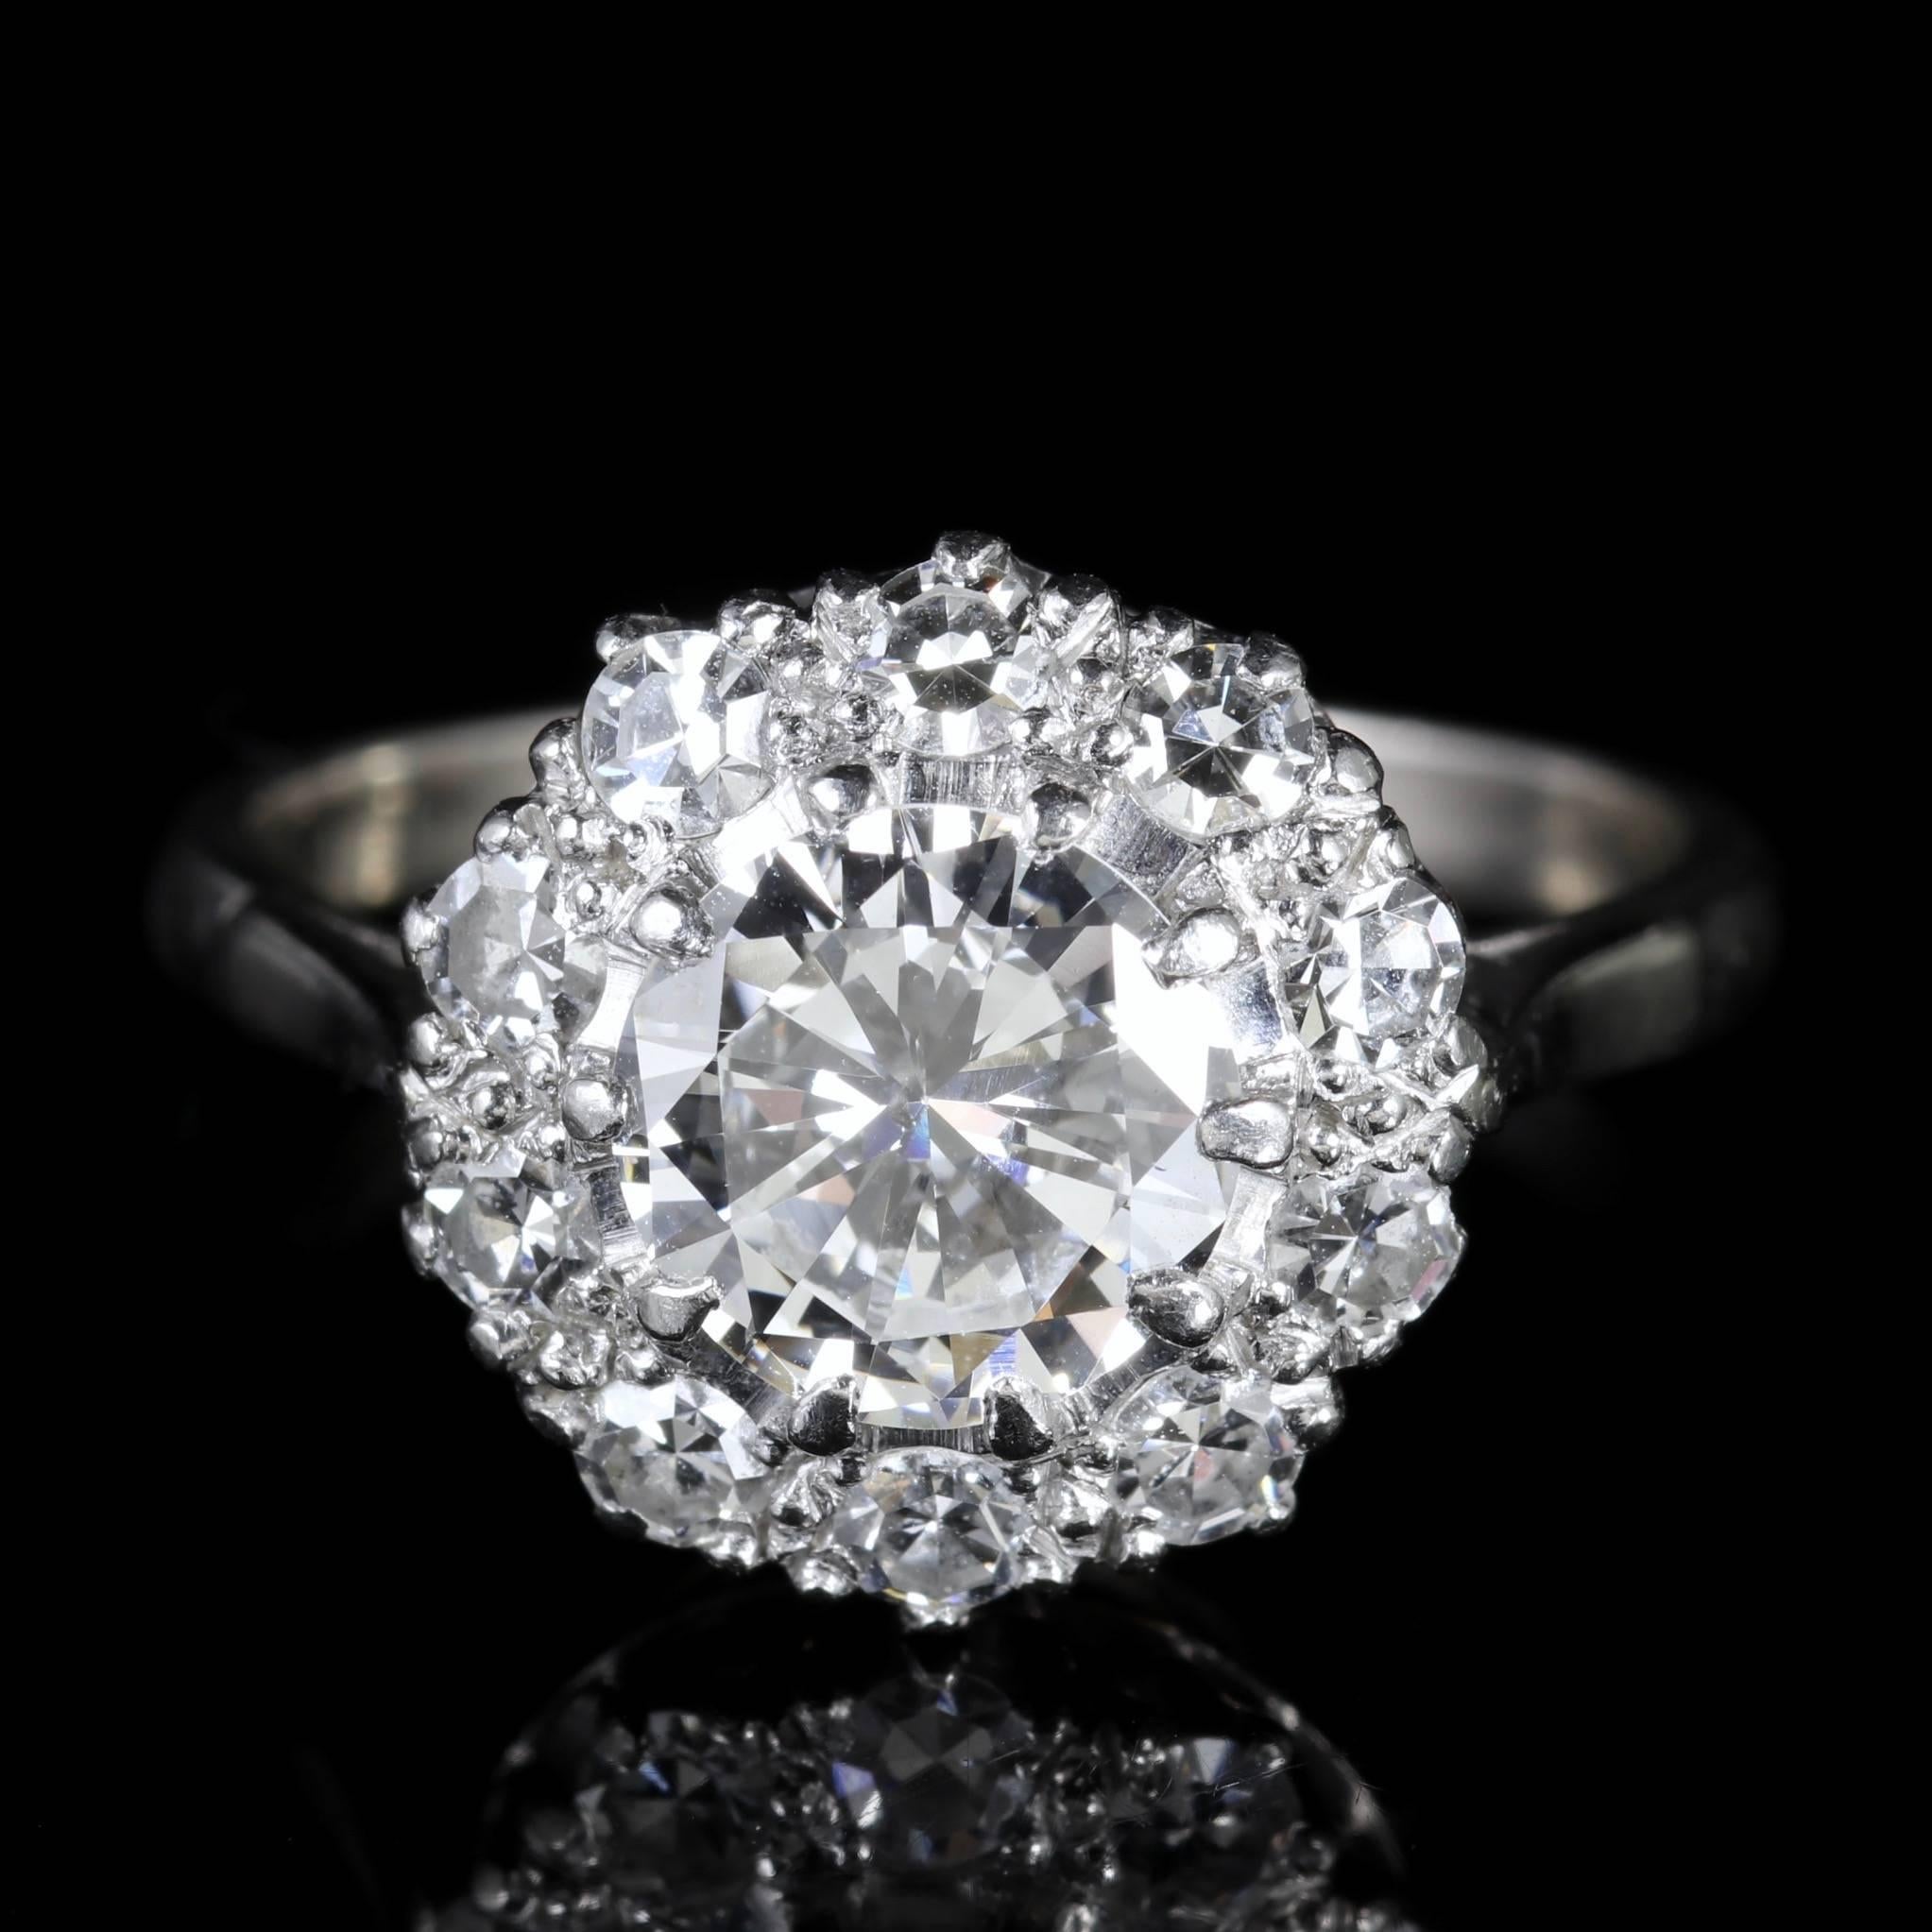 This fabulous antique Edwardian all Platinum Diamond ring is Circa 1915.

The large old cut solitaire Diamond is 1.60ct in size with additional diamonds set around the large central Diamond.

The Diamonds sparkle beautifully complimenting the